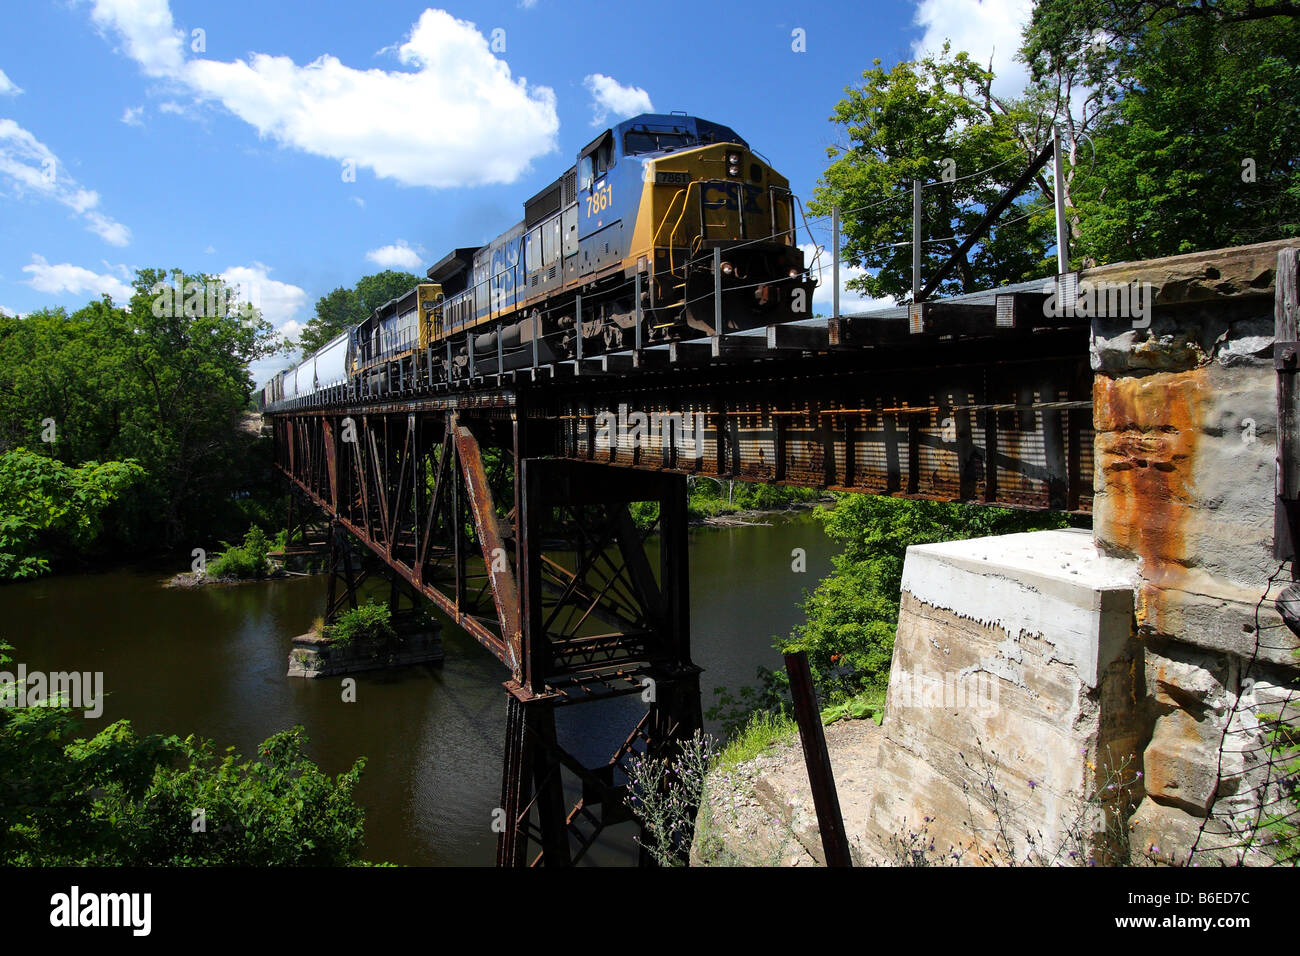 A modern diesel train engine crosses a steel trestle that s well over 100 years old in Grand Ledge, Michigan Stock Photo